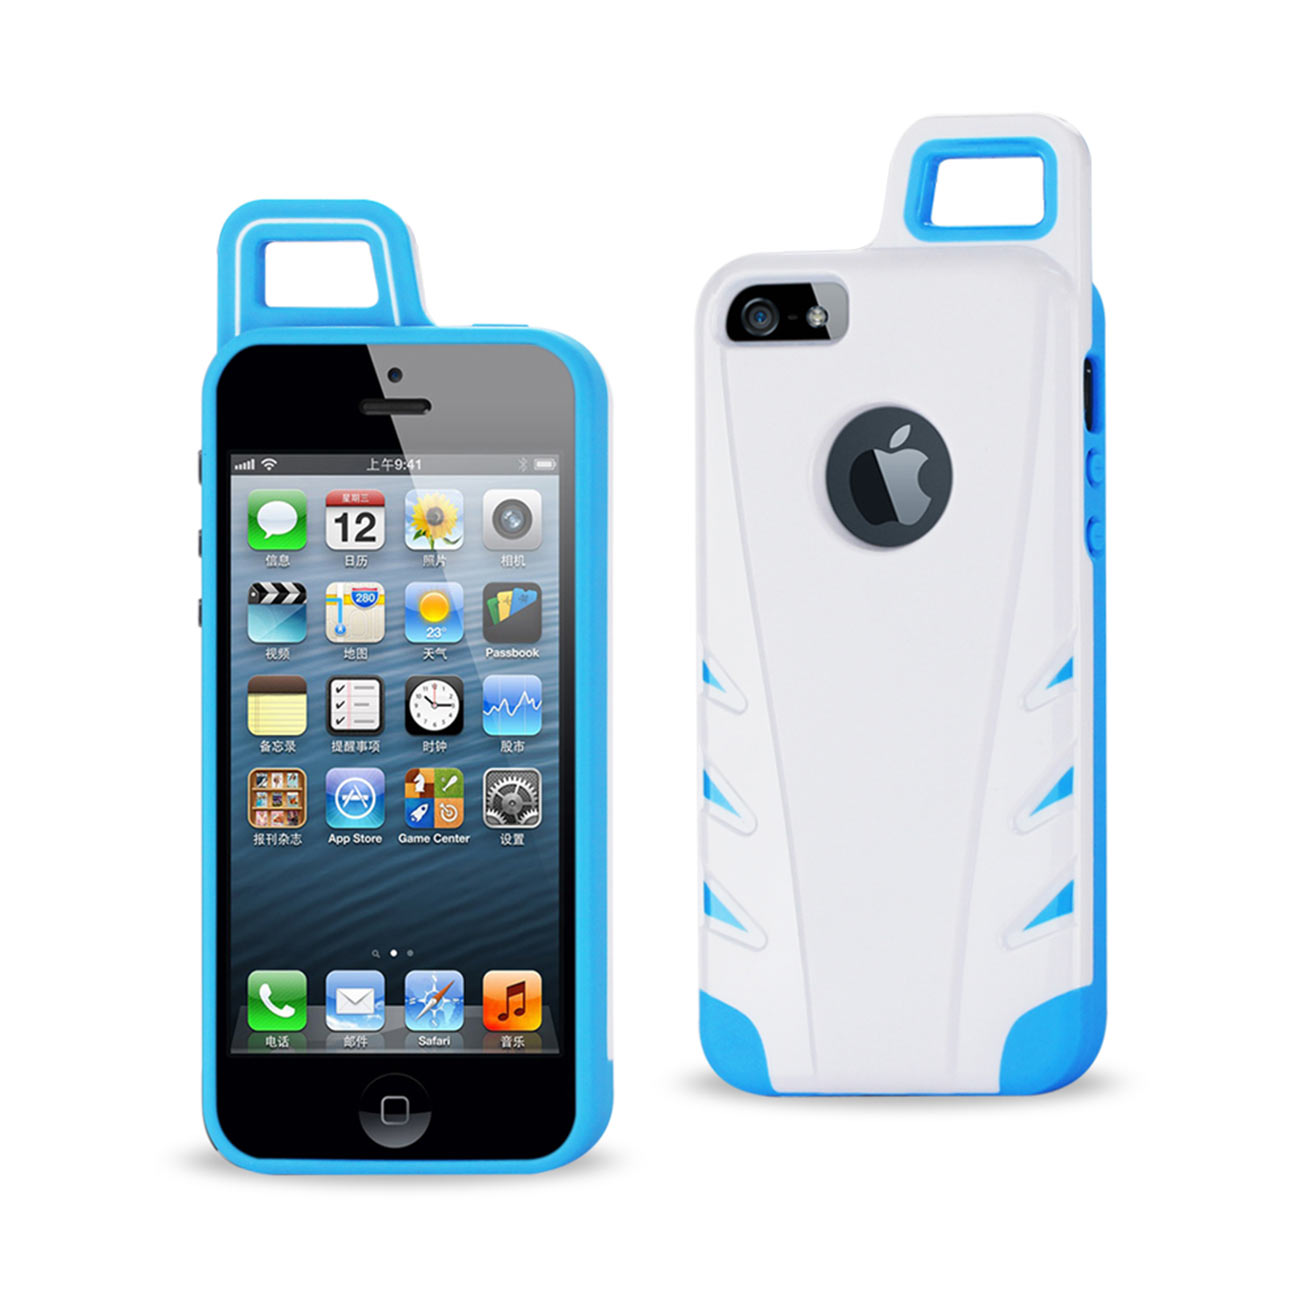 Case Hybrid Drop Proof Workout With Hook iPhone 5/ 5S/ SE White Navy Color